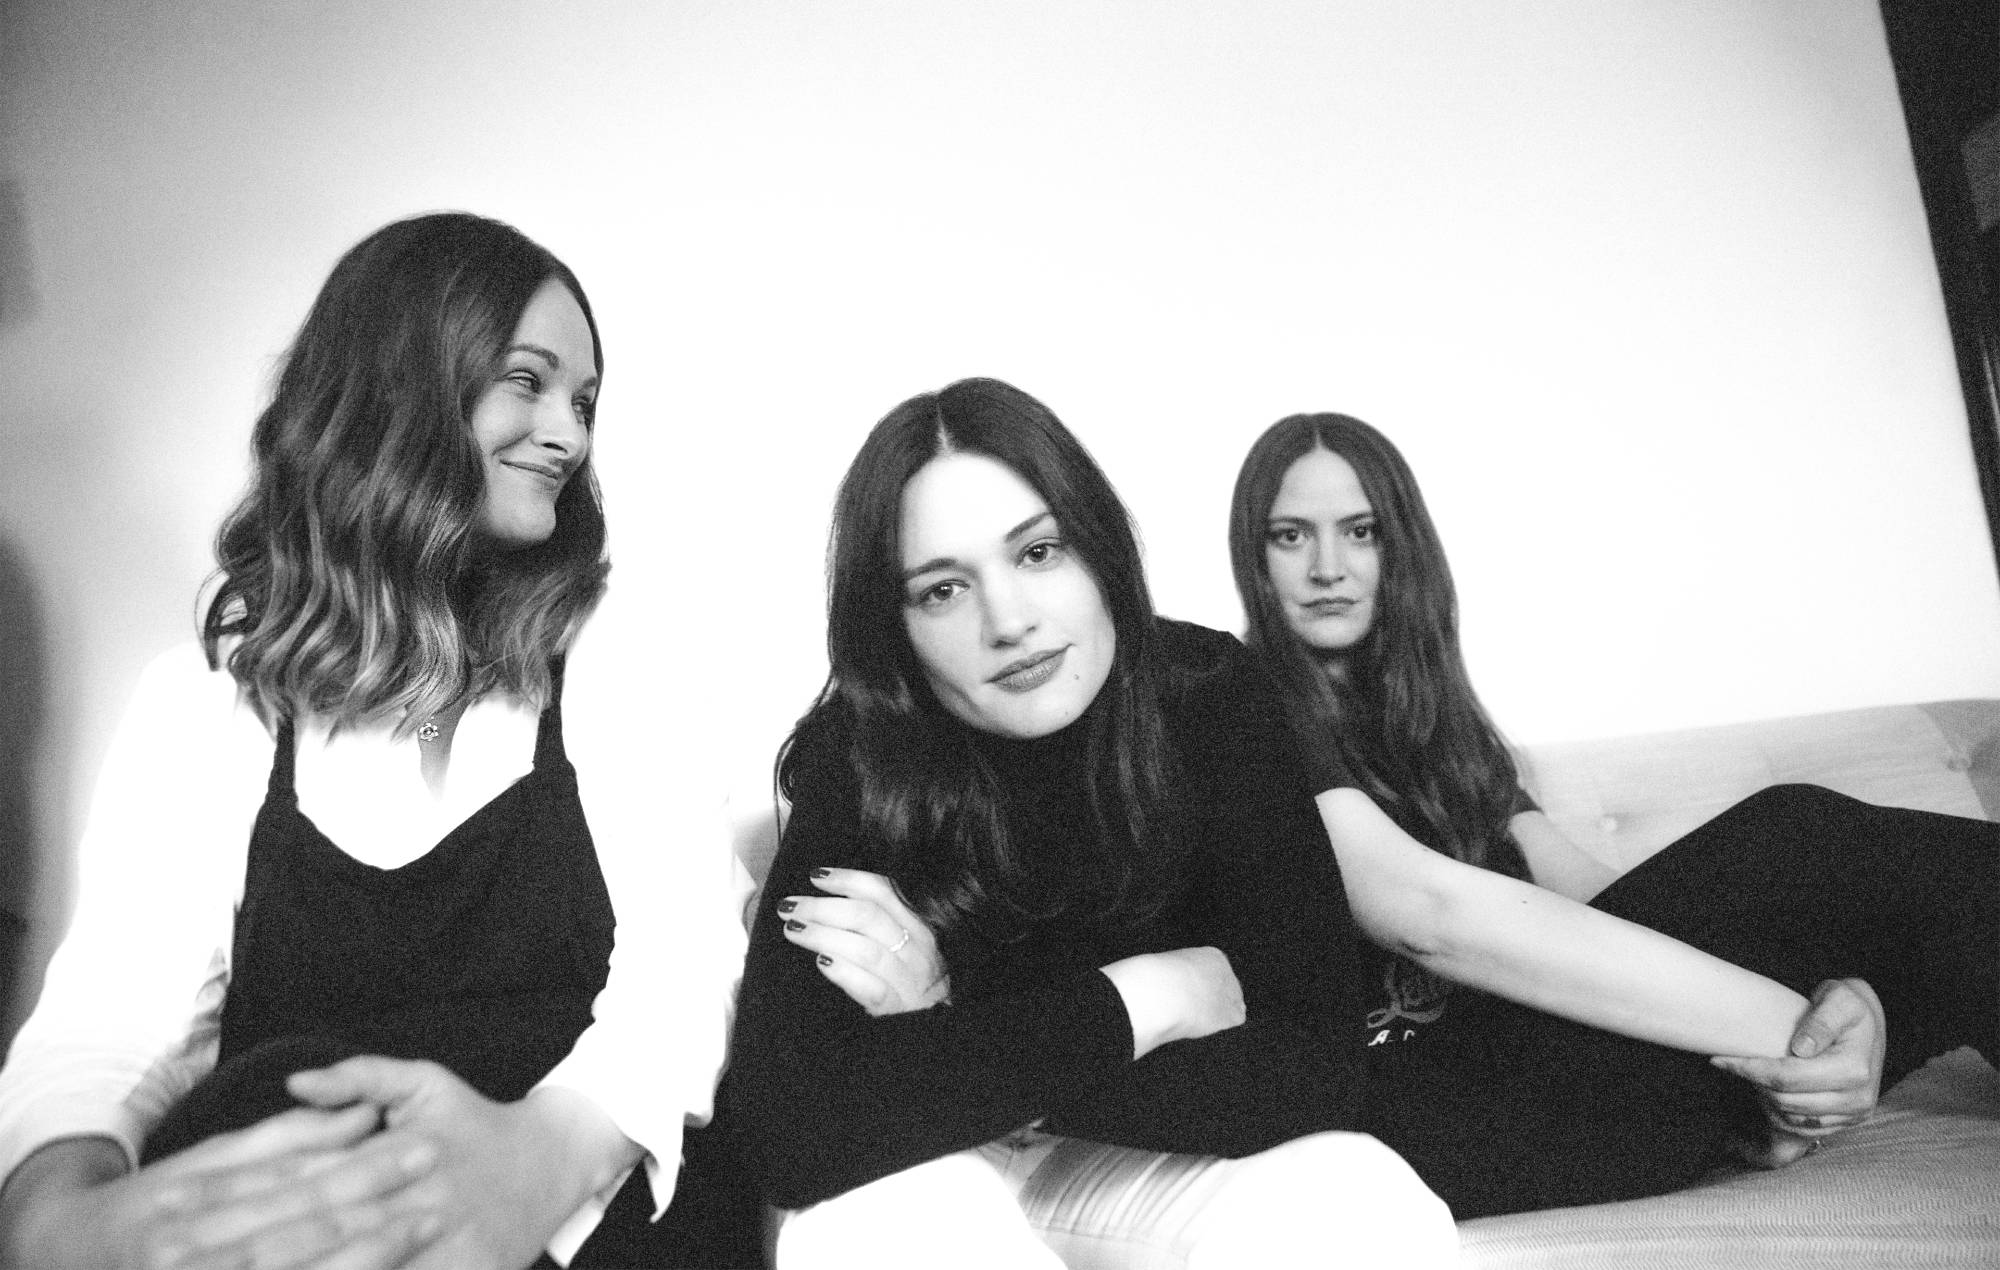 The Staves: “There isn’t time to fuck about. Just say how you feel and fucking go for it”